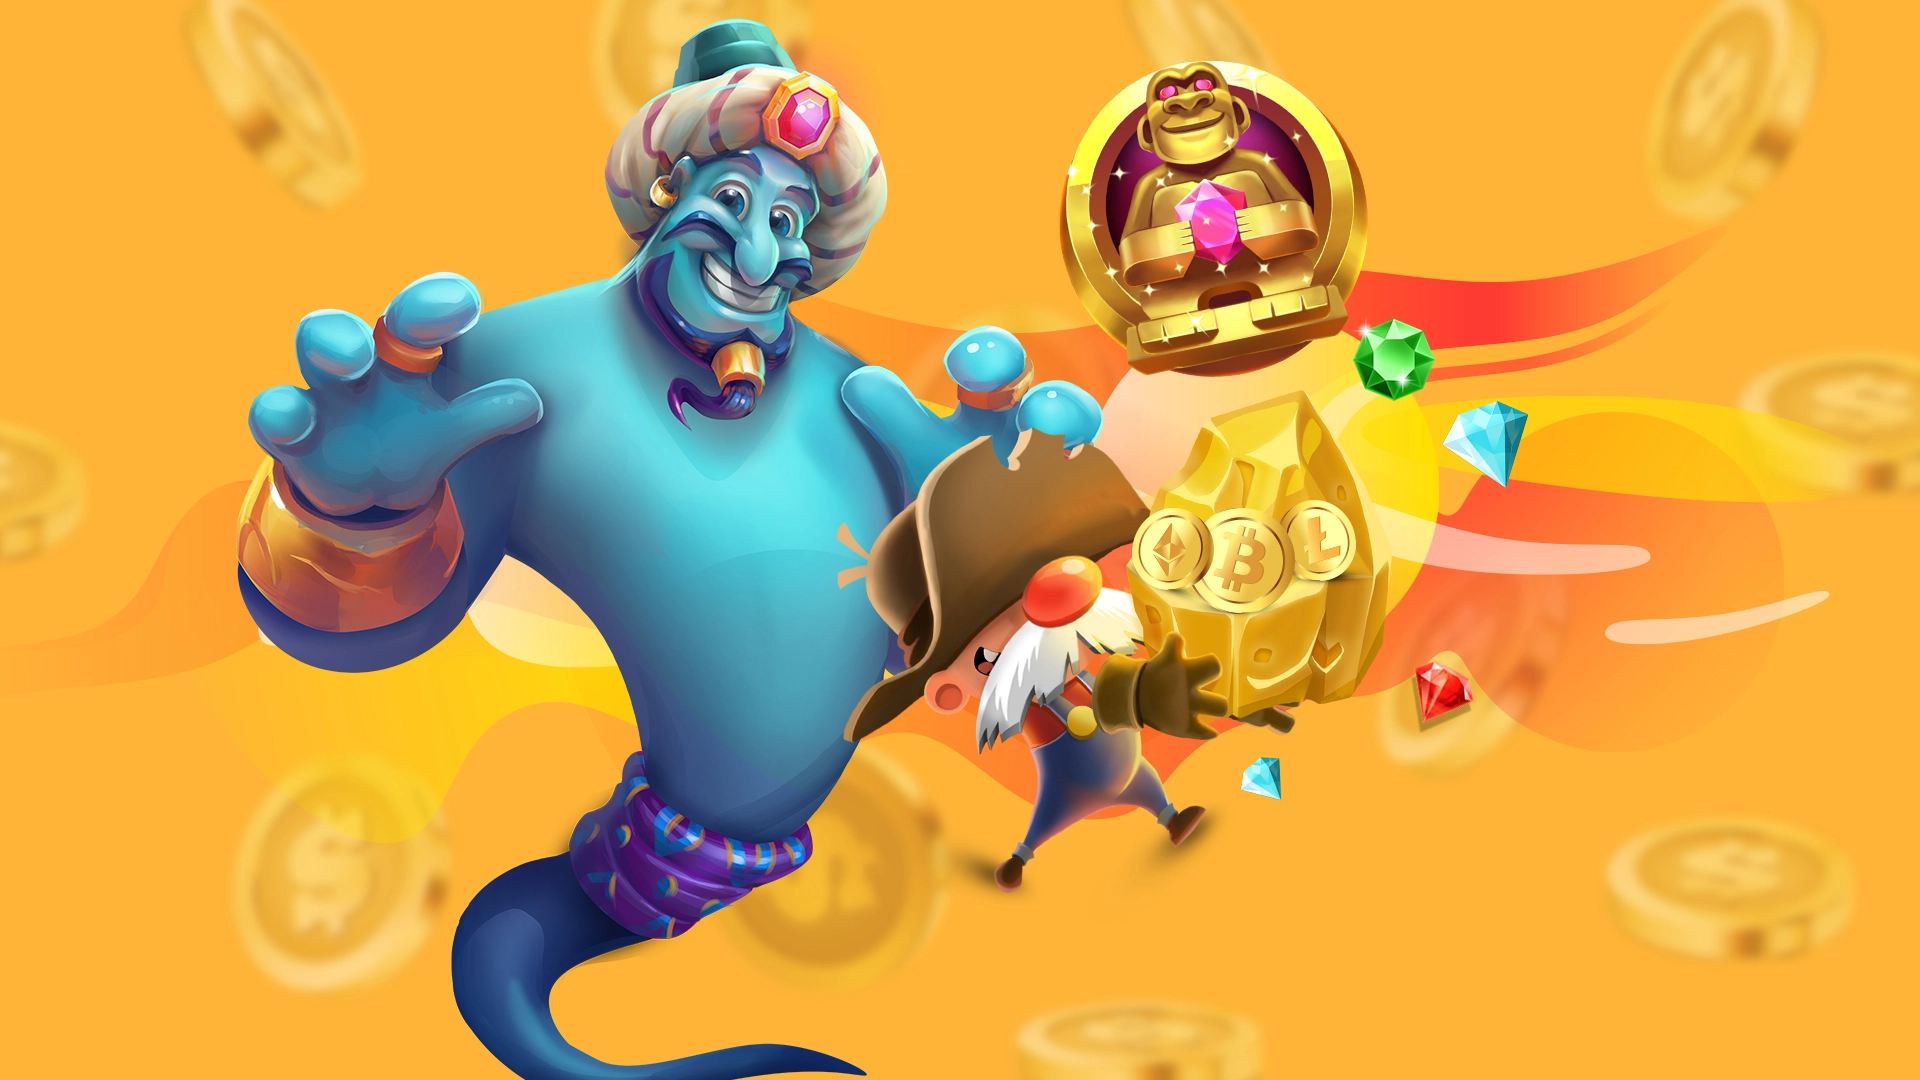 Characters from SlotsLV slots games, such as a blue genie and Gold Rush Gus, stand in front of a yellow background with swirling gold coins.